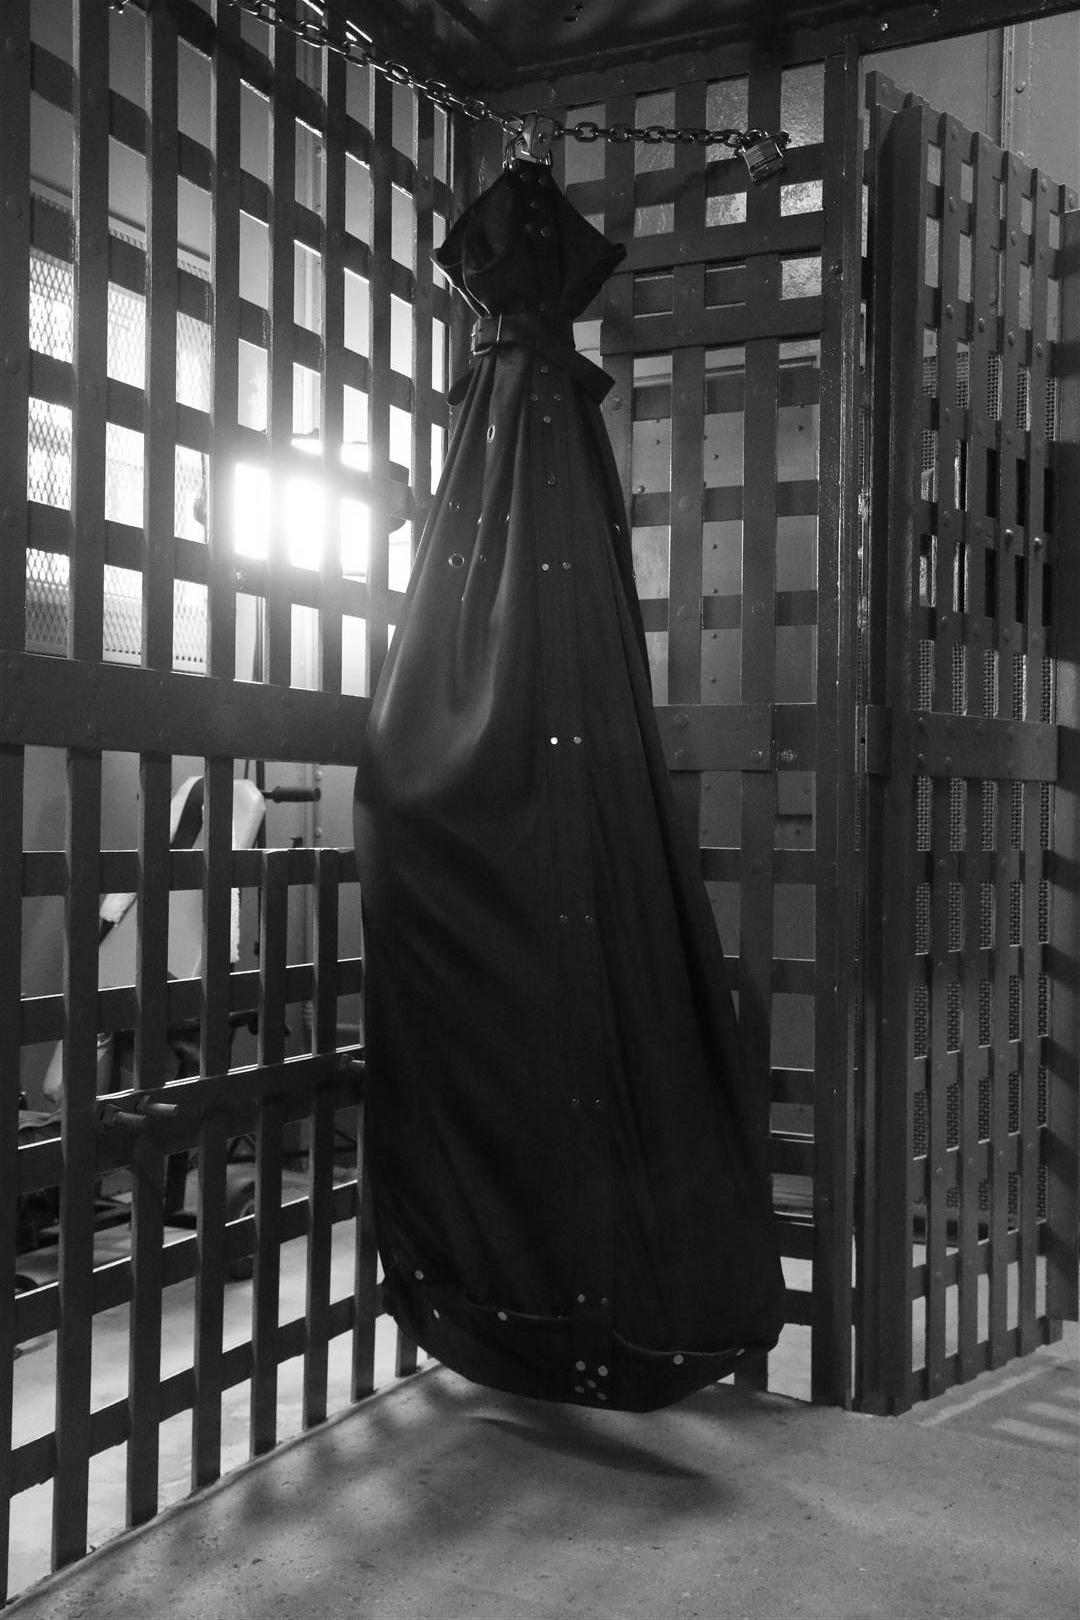 fearslave: Jail Sessions - 2 Later that day and the next day we had more video shooting